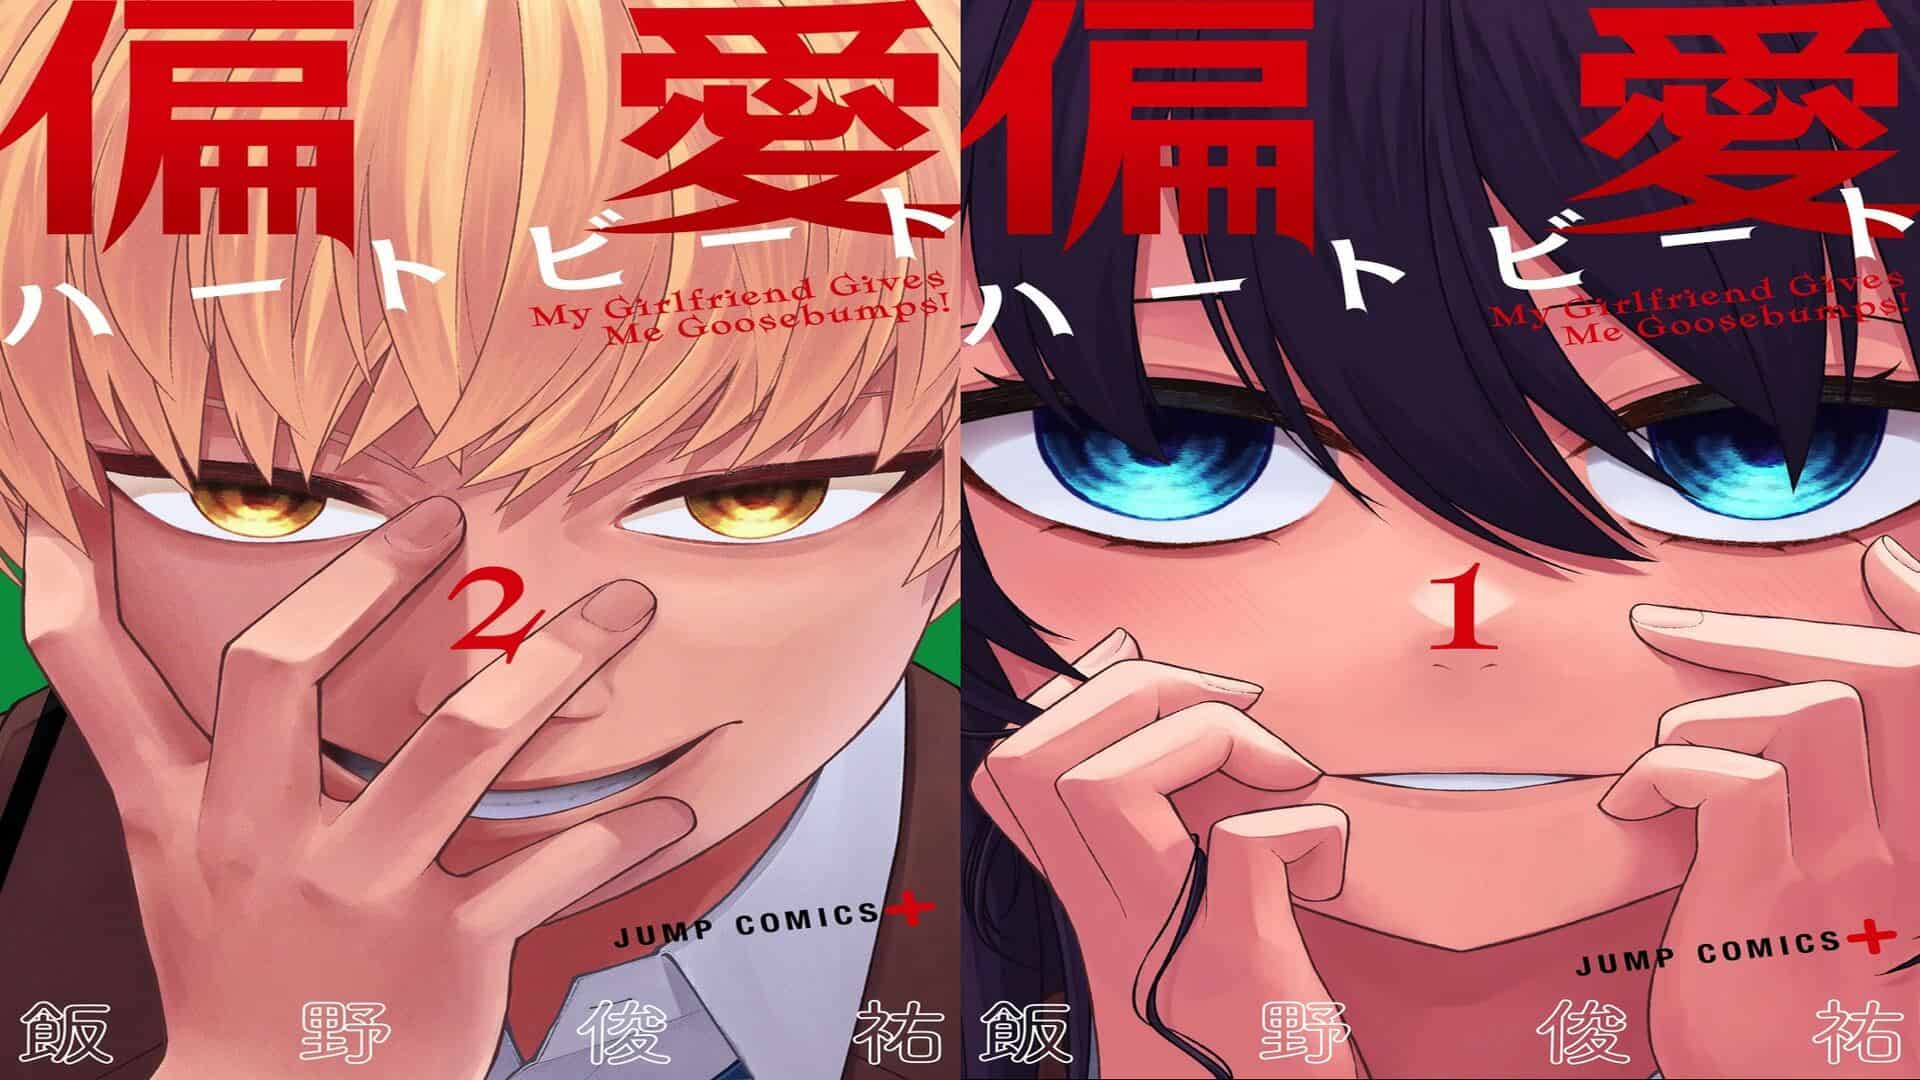 My Girlfriend Gives Me Goosebumps! Manga Cover Pages Volumes 1&2